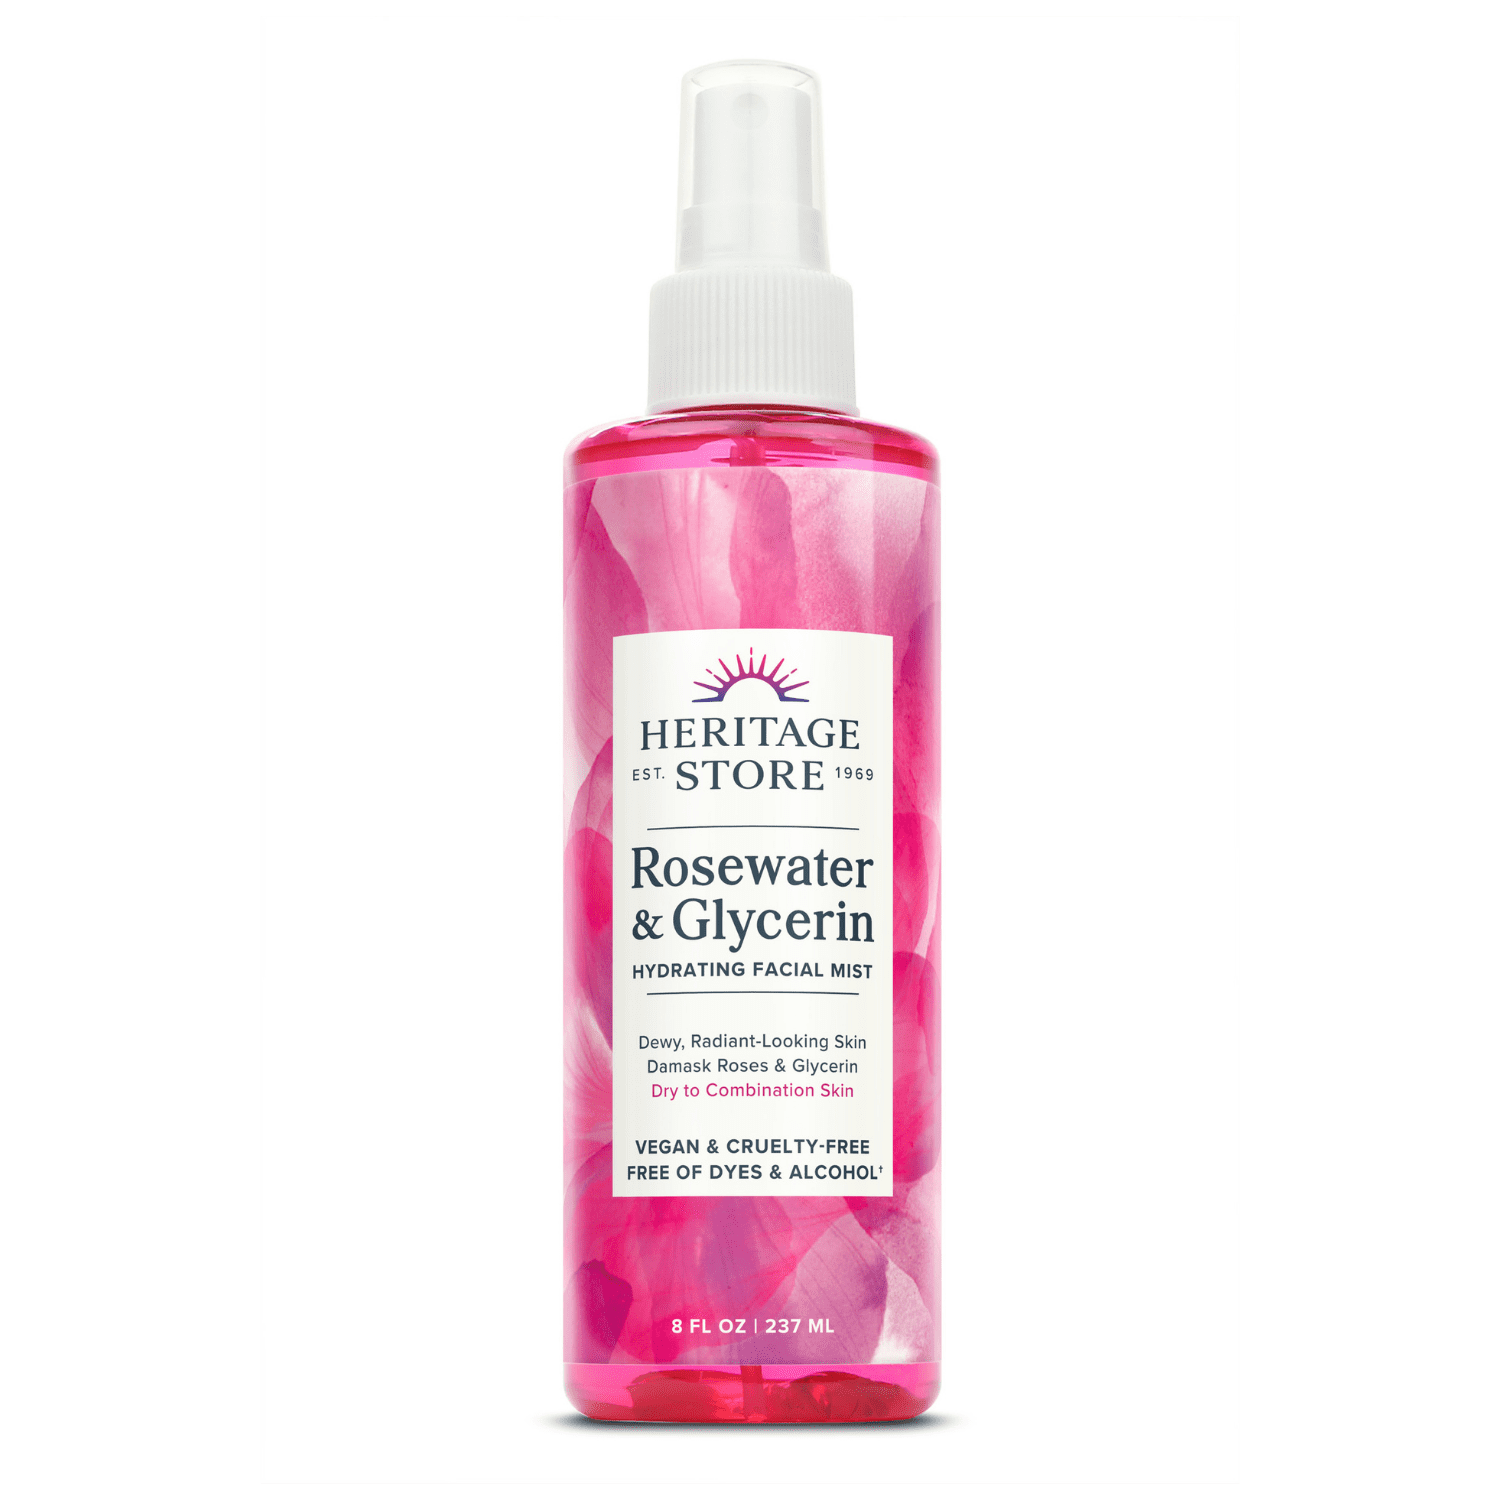 Rosewater & Glycerin, Hydrating Mist for Skin & Hair, 8 fl oz by Heritage  Store 